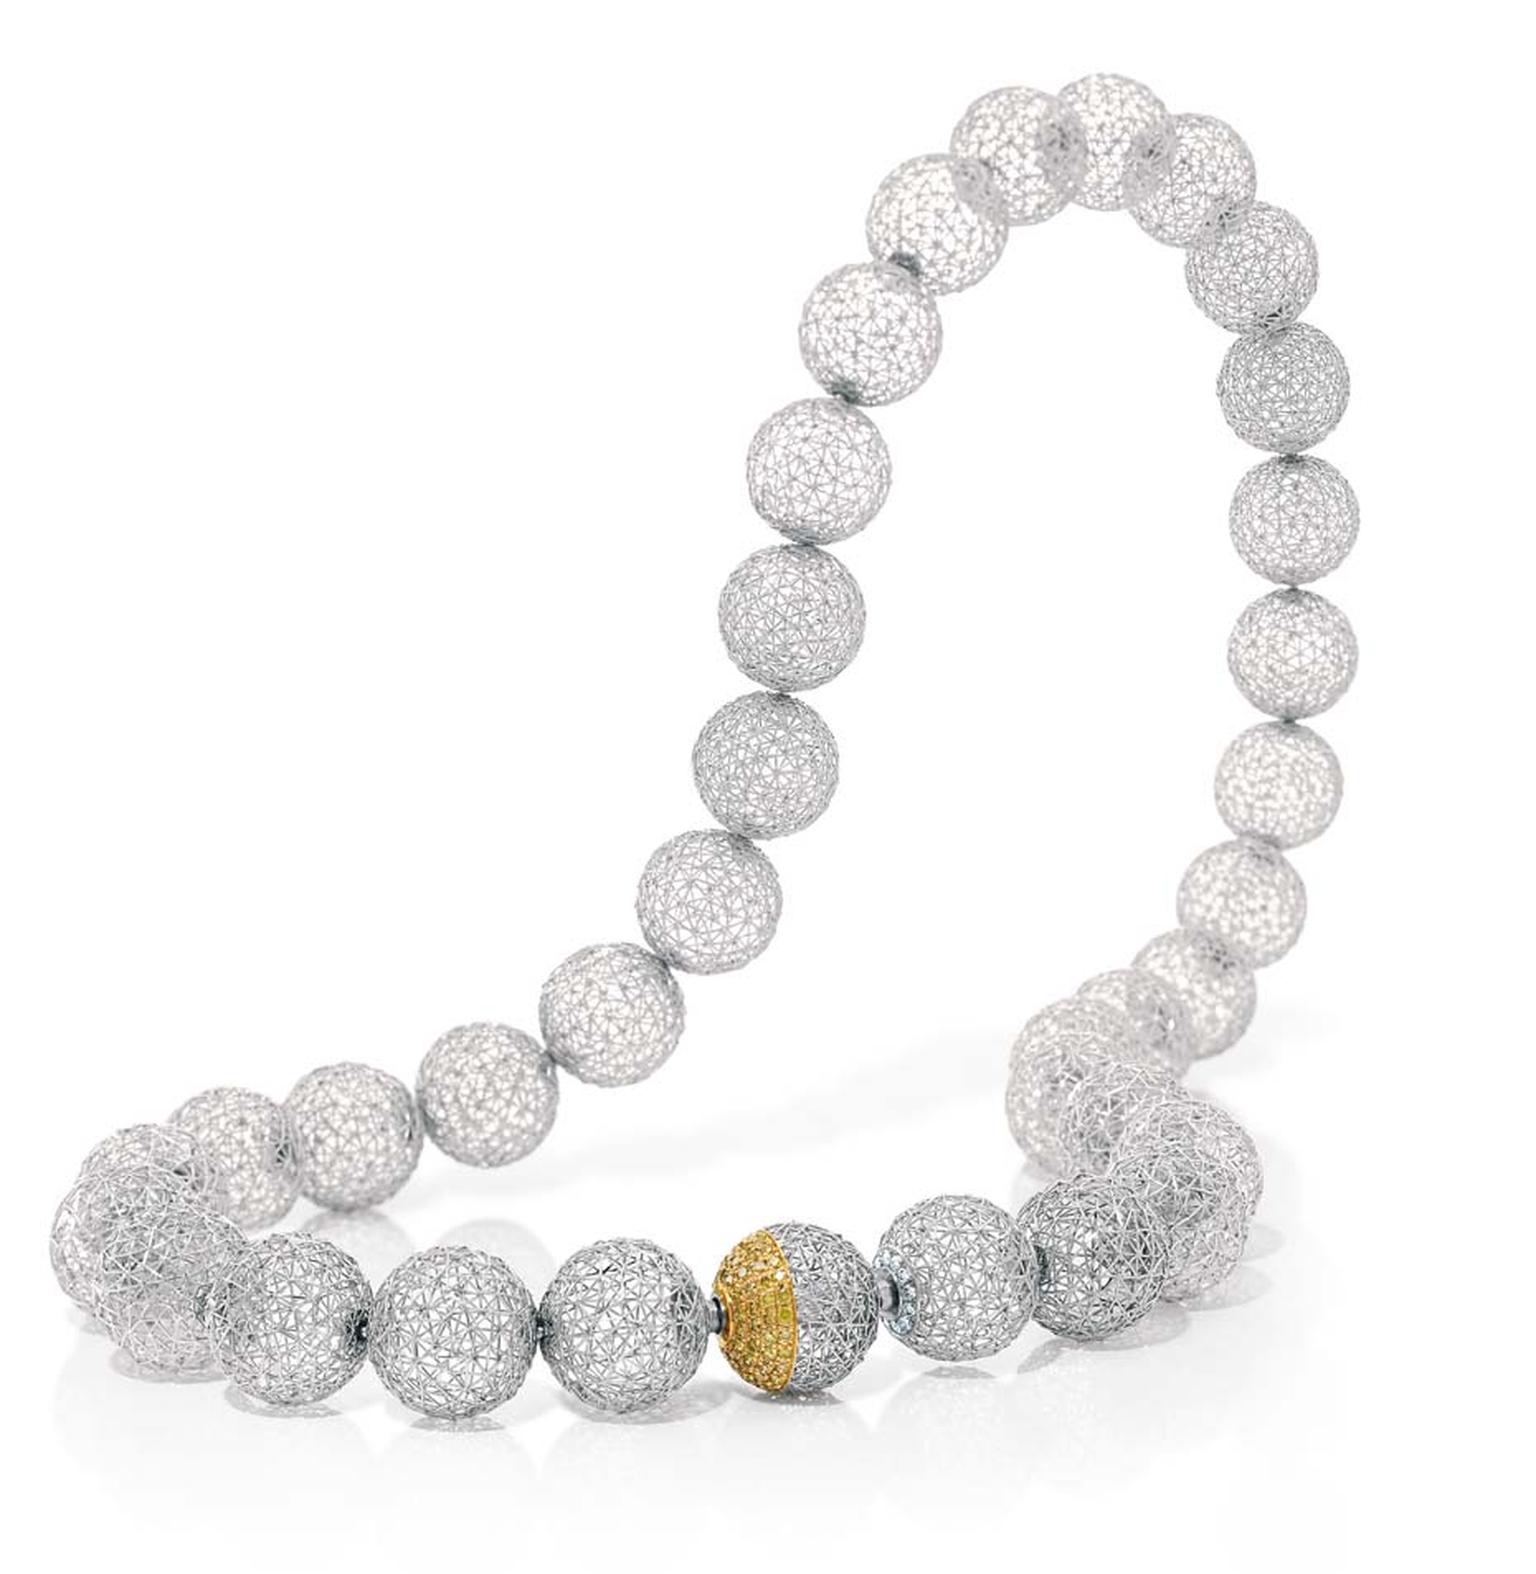 Tom Rucker's Geo Geosphere necklace was assembled from 26 laser-welded Platinum 950 balls, connected using 3D joints.